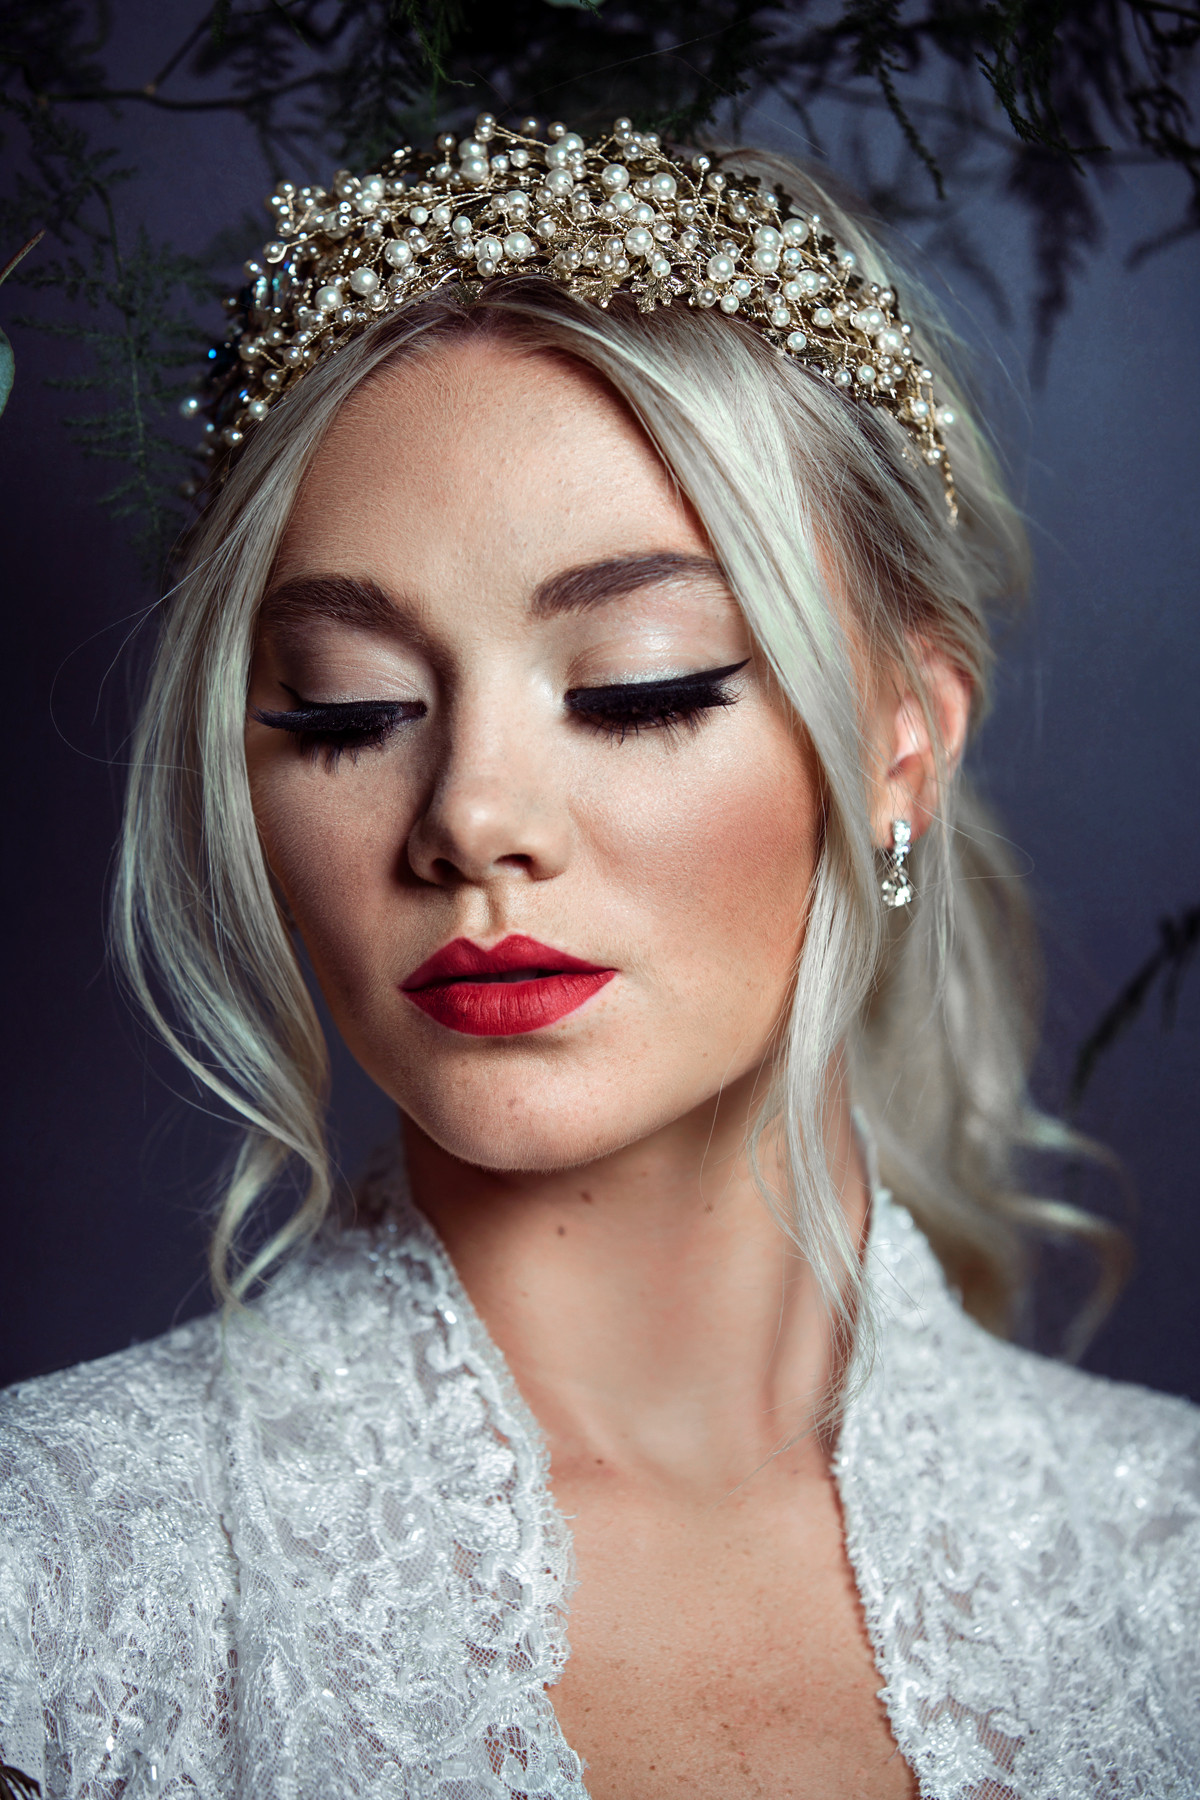 How To Make Wedding Veils And Tiaras
 Beautiful Bridal Headpiece Trends for 2019 and How To Wear